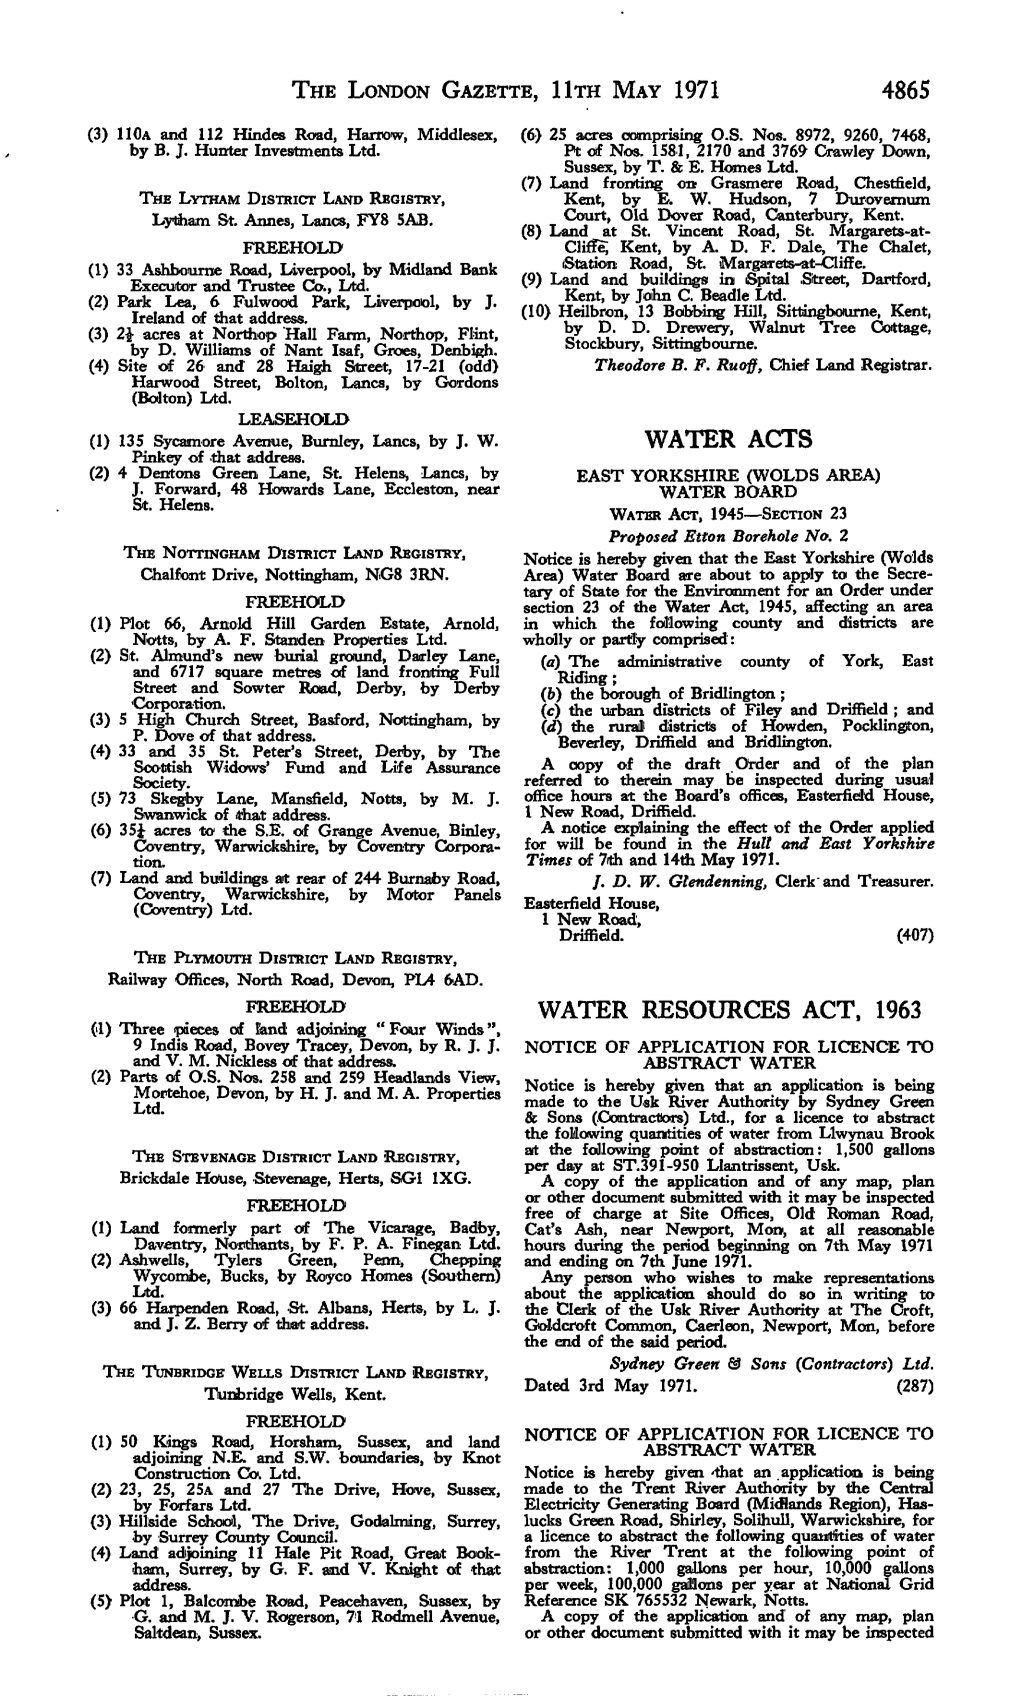 The London Gazette, Hth May 1971 4865 Water Acts Water